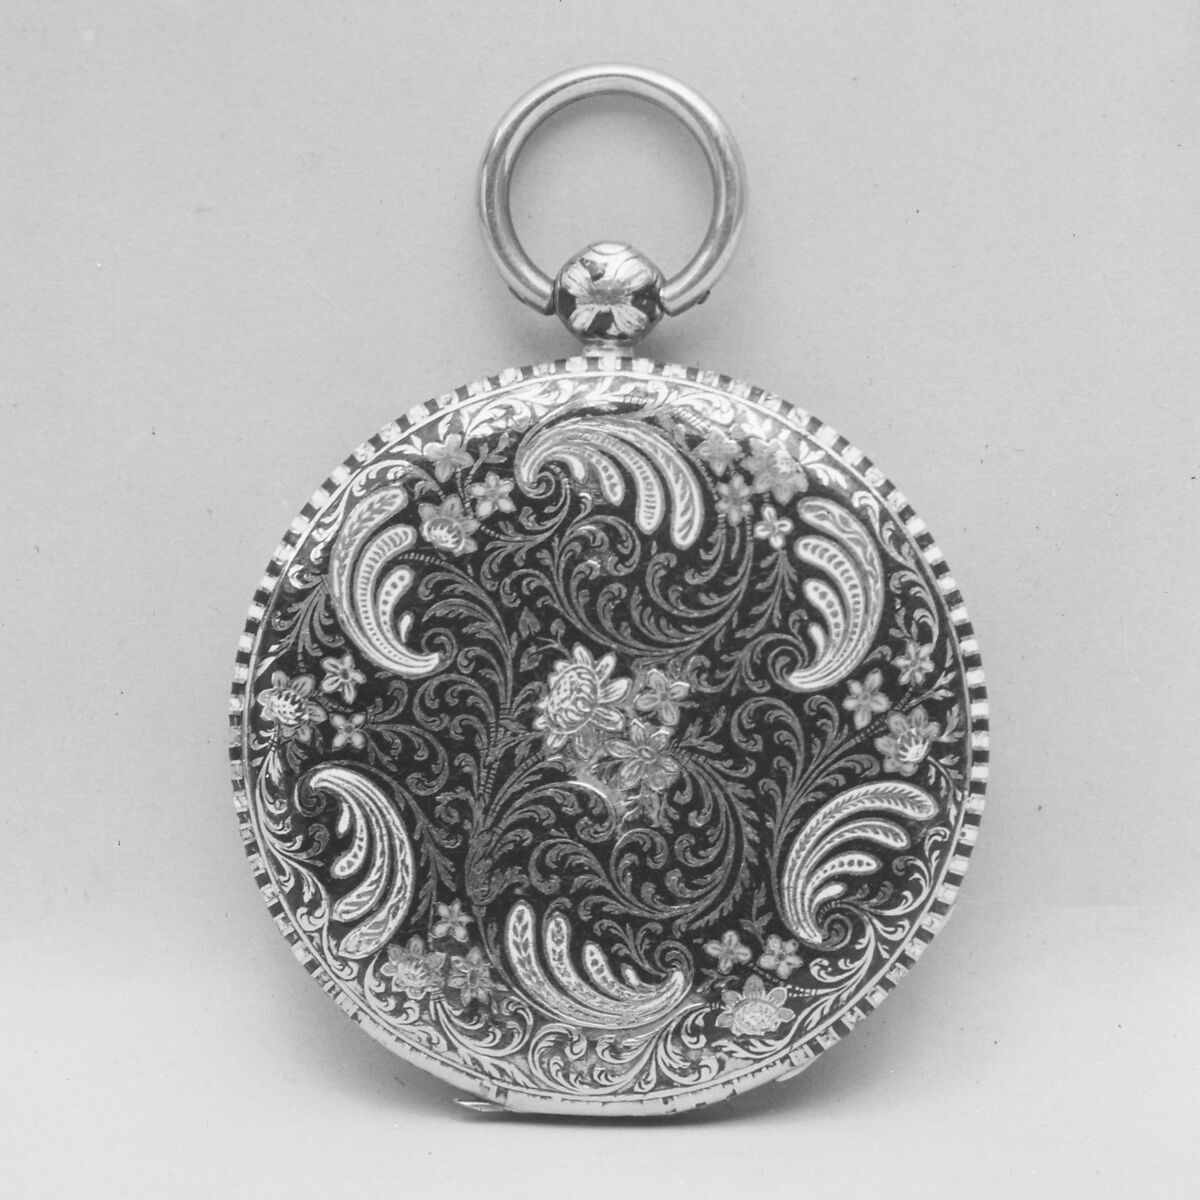 Watch, Watchmaker: Firm of Lépine (French, active Paris, 1762–1914), Gold, engine-turned silver, niello, champlevé enamel, French, Paris 